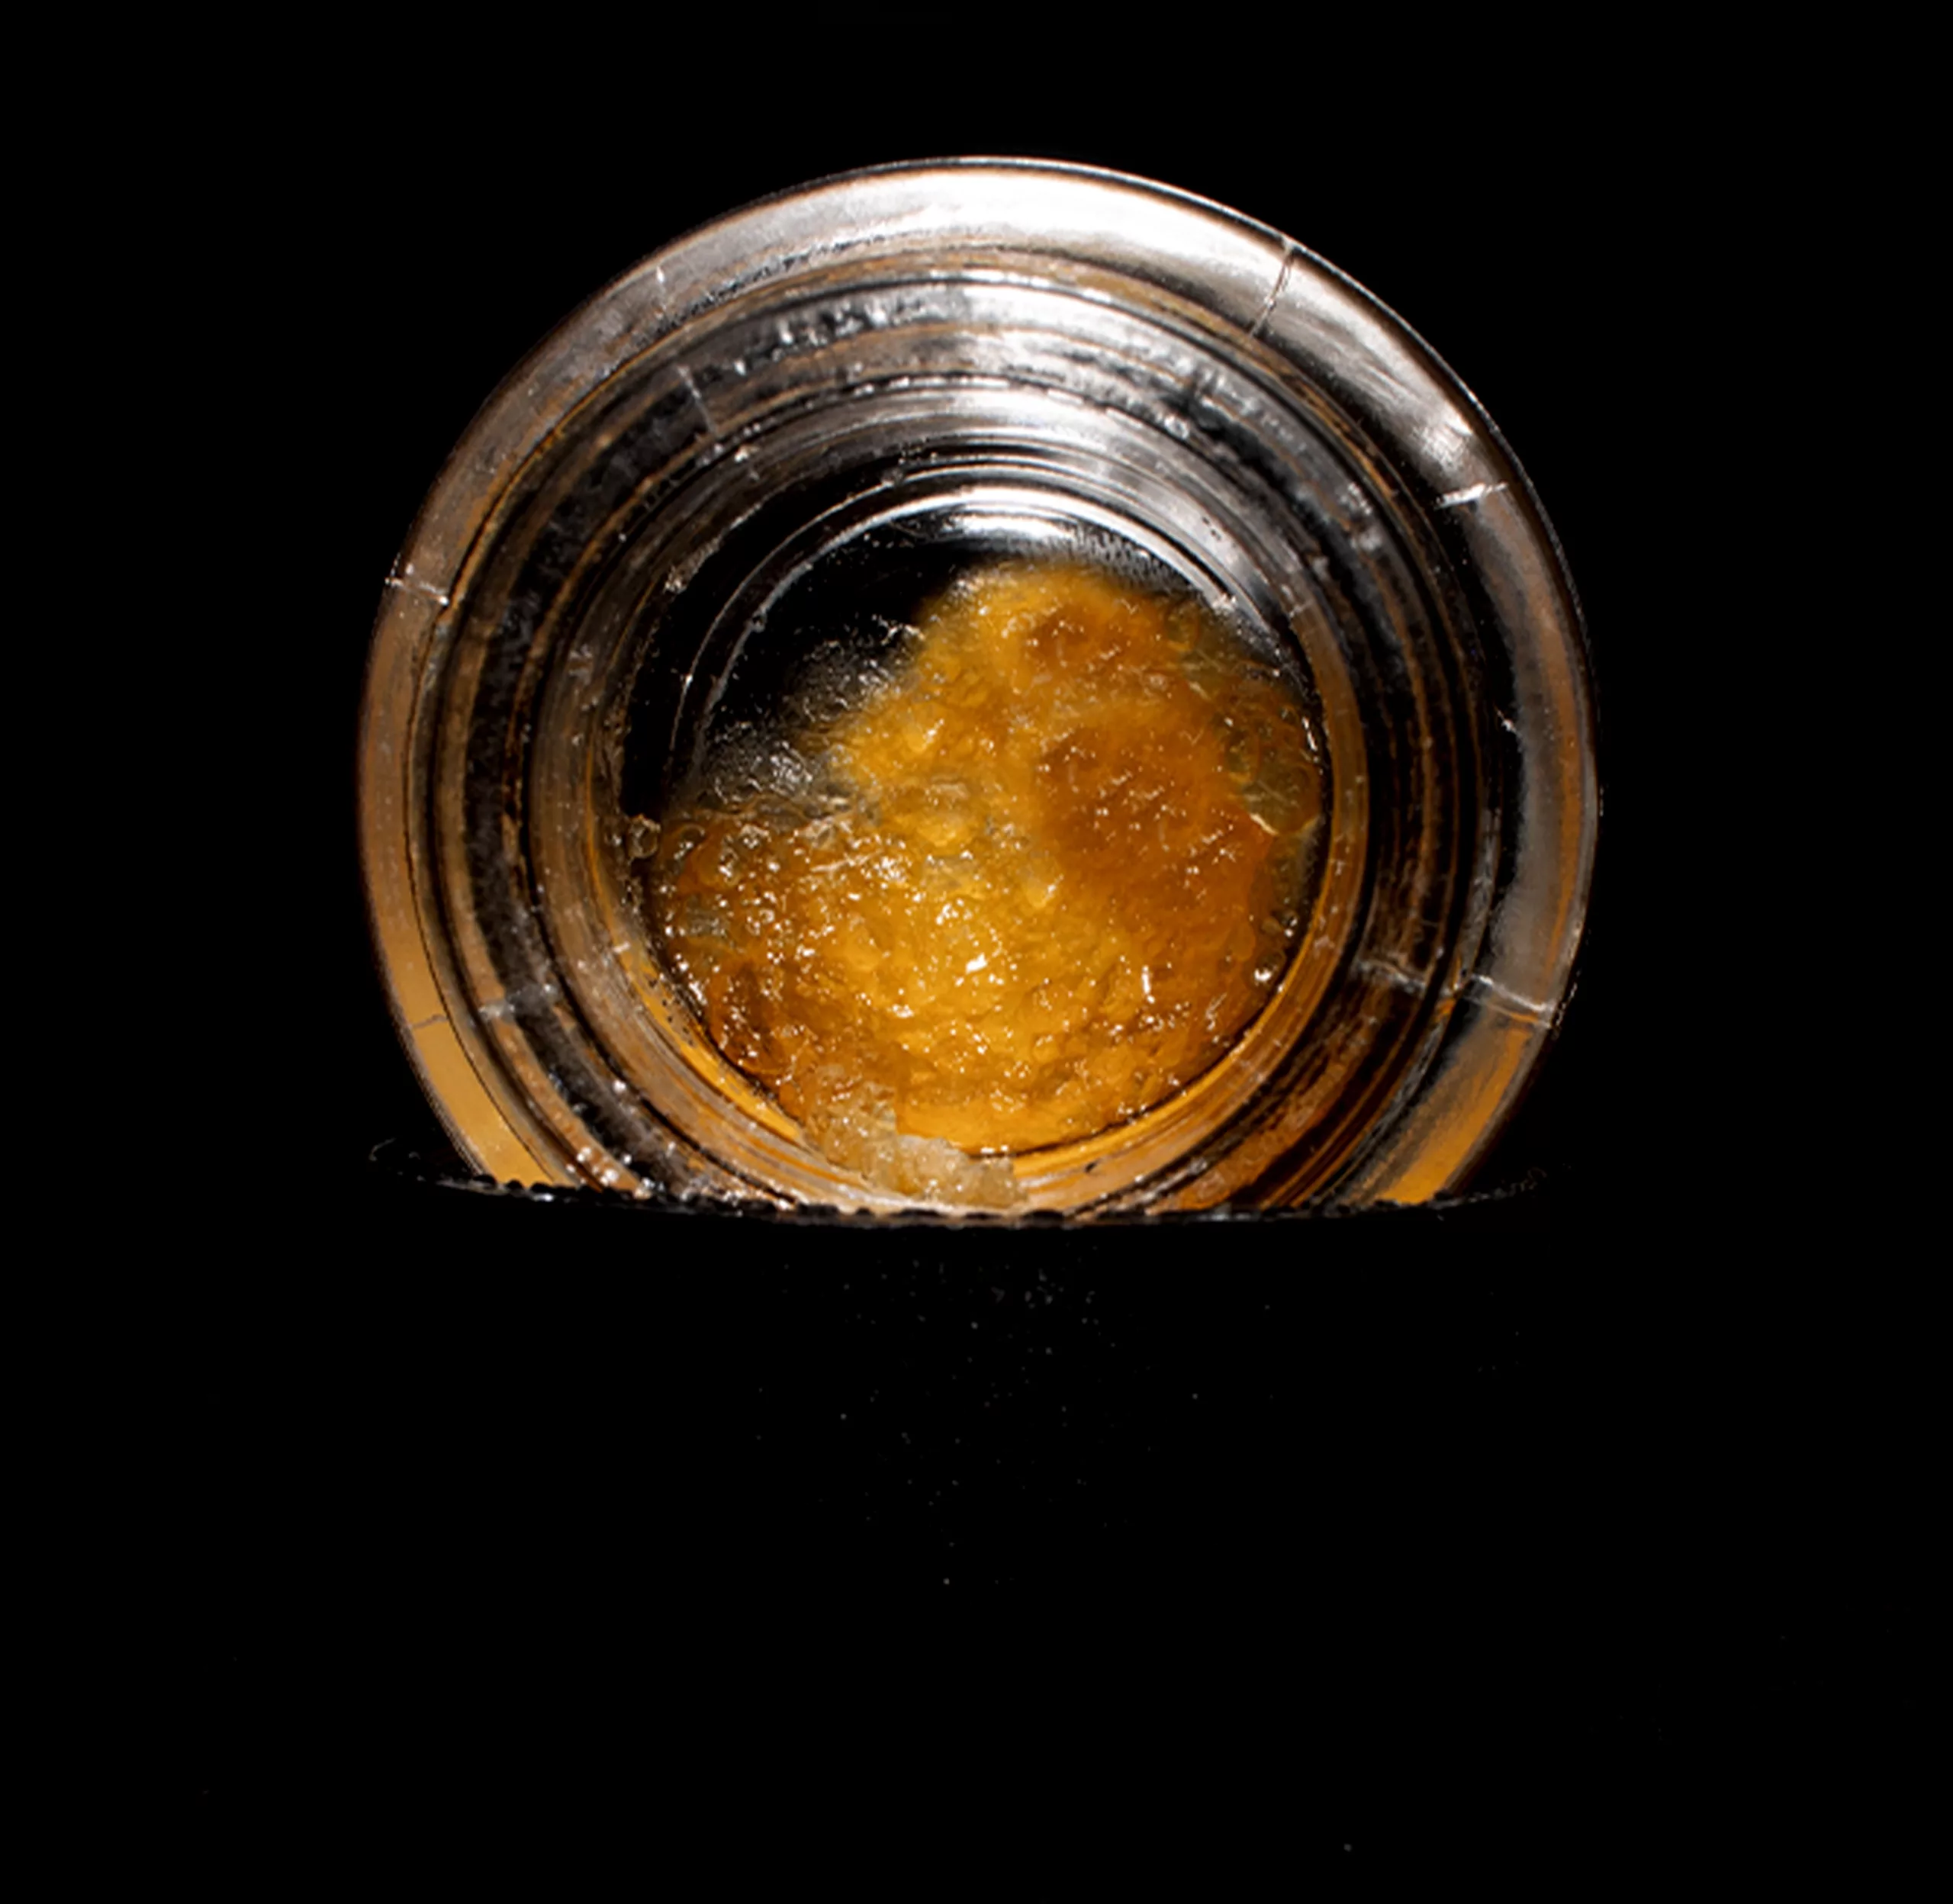 Faktor Michigan Cannabis Concentrates, Extracts, Premium Flower and more.